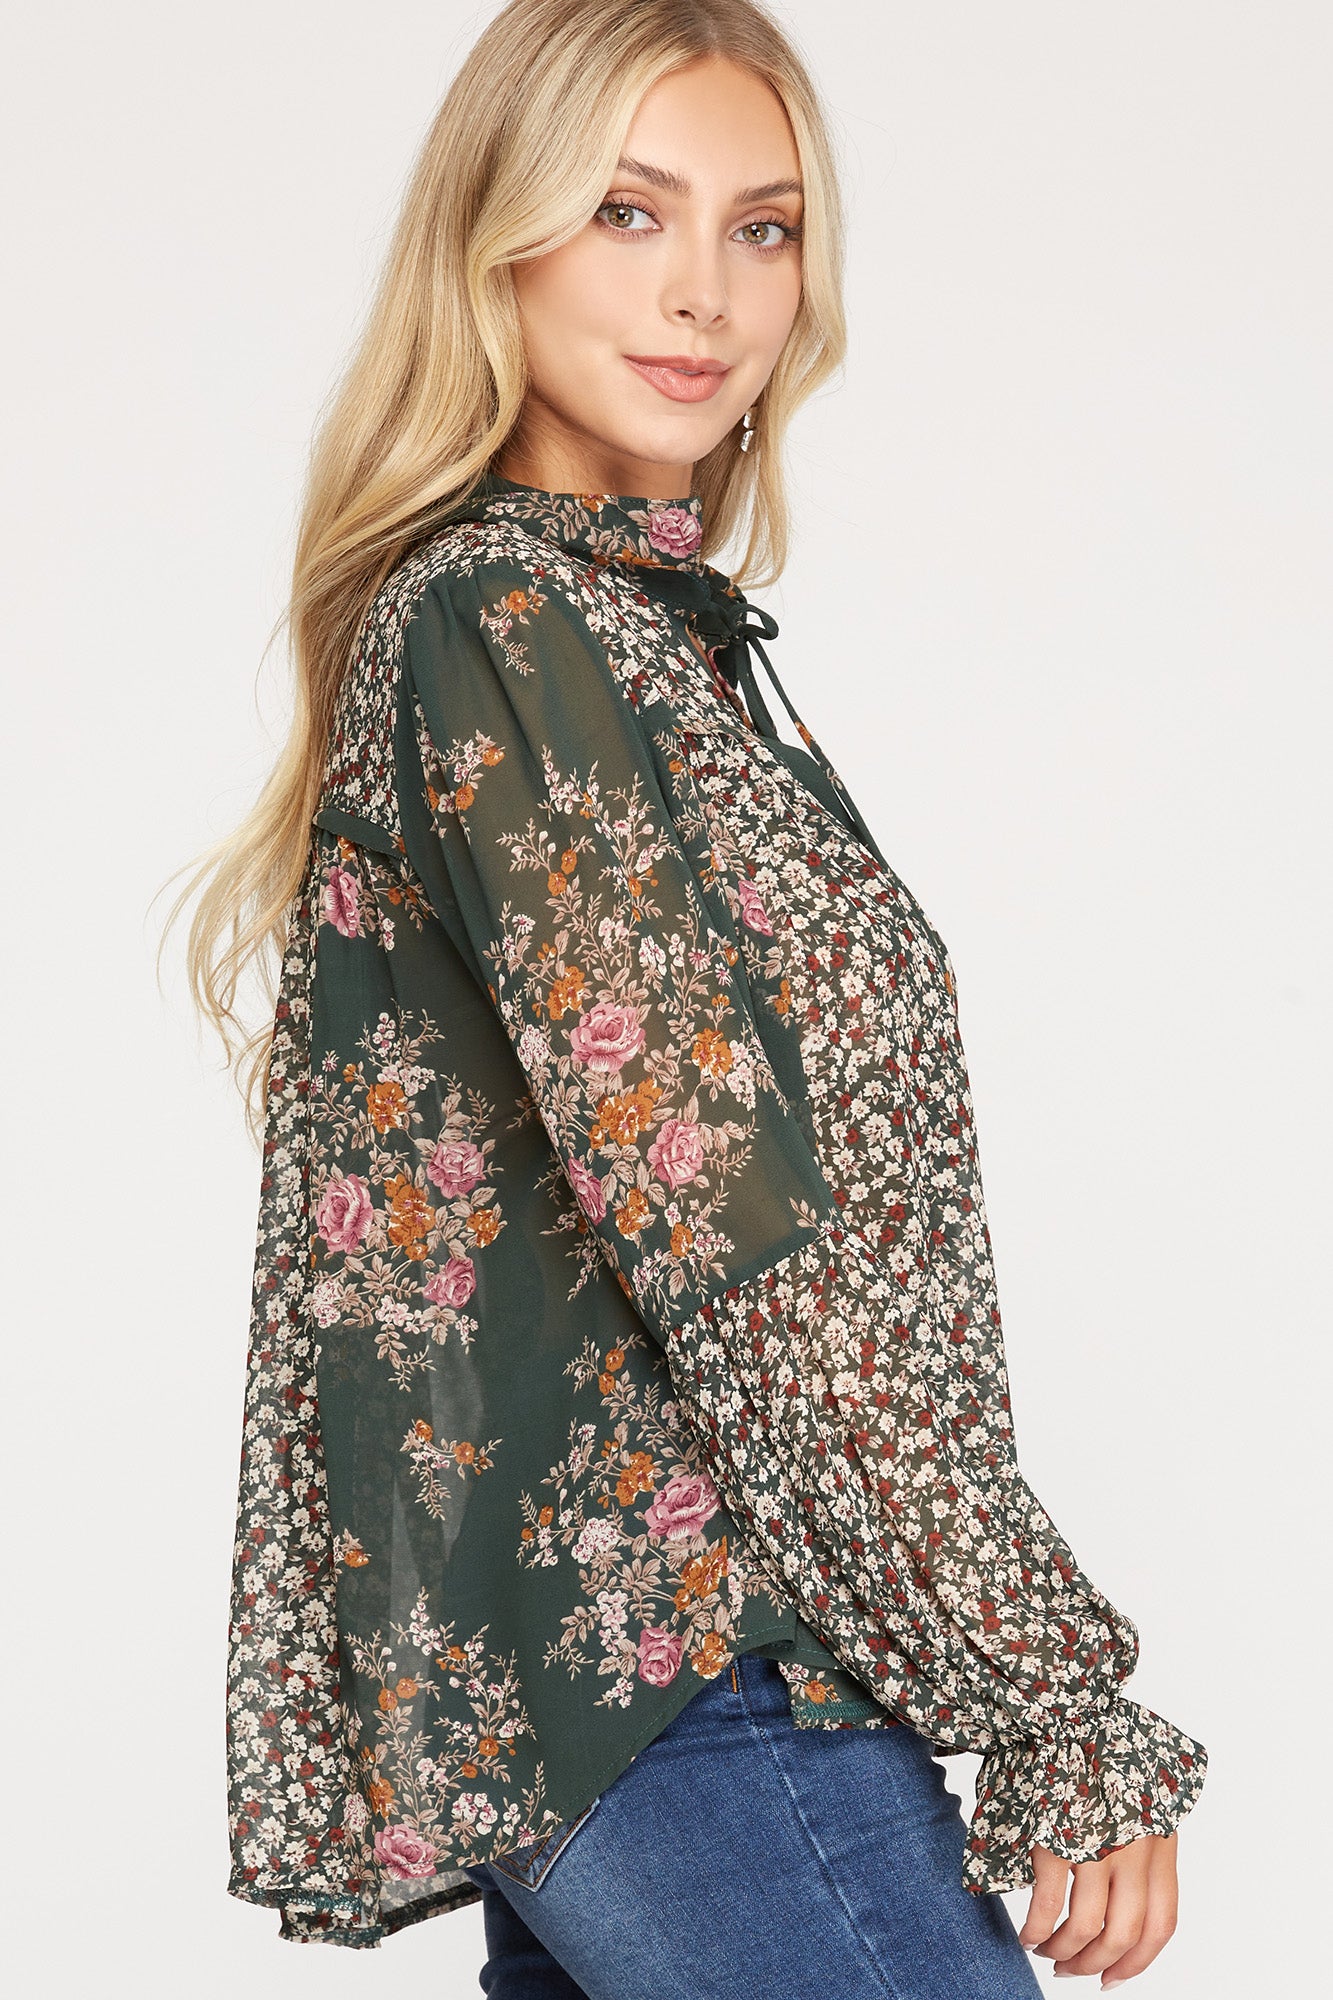 Long Sleeve Woven Floral Top!